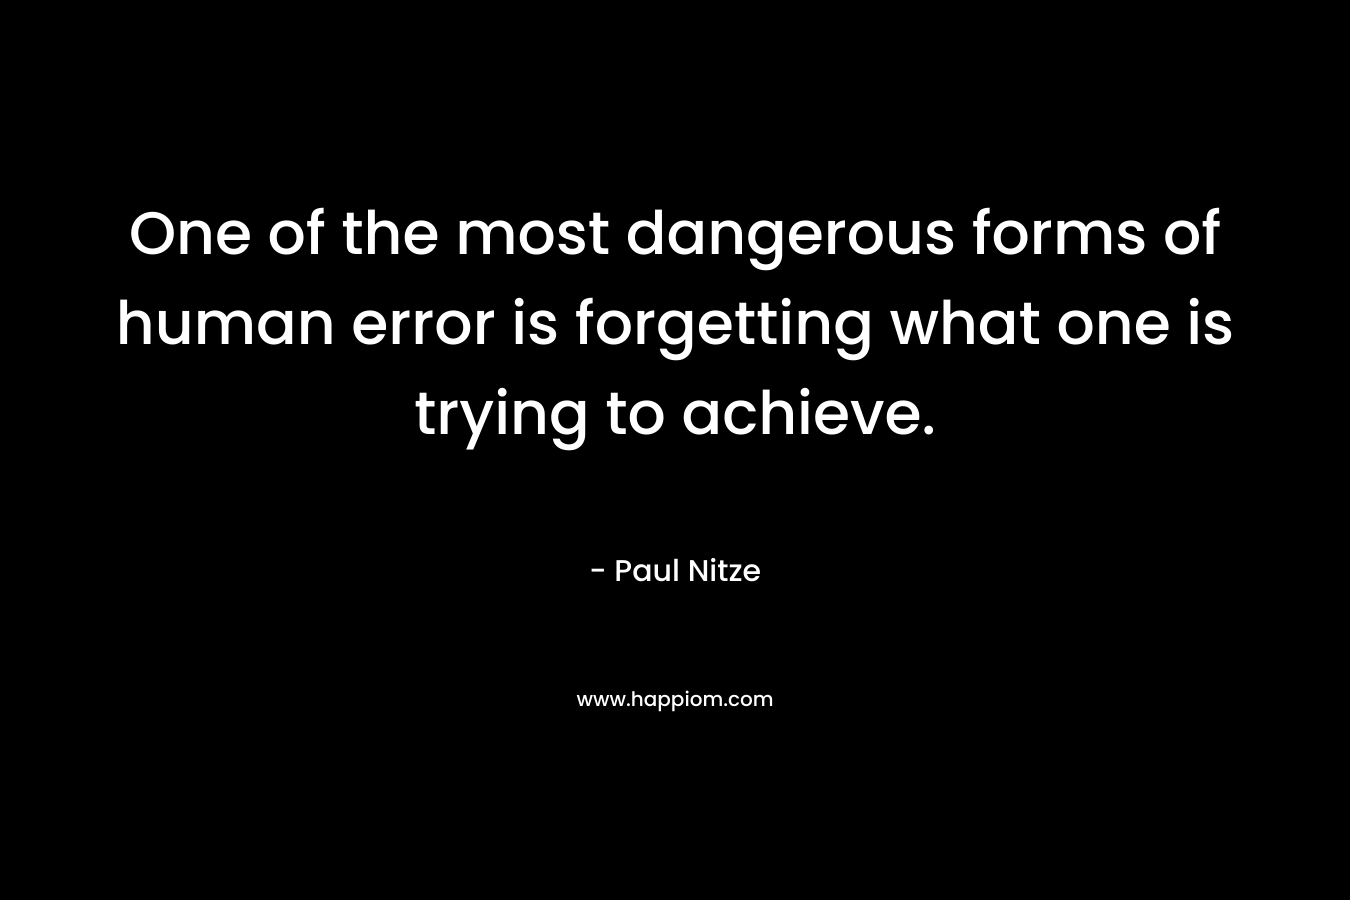 One of the most dangerous forms of human error is forgetting what one is trying to achieve.